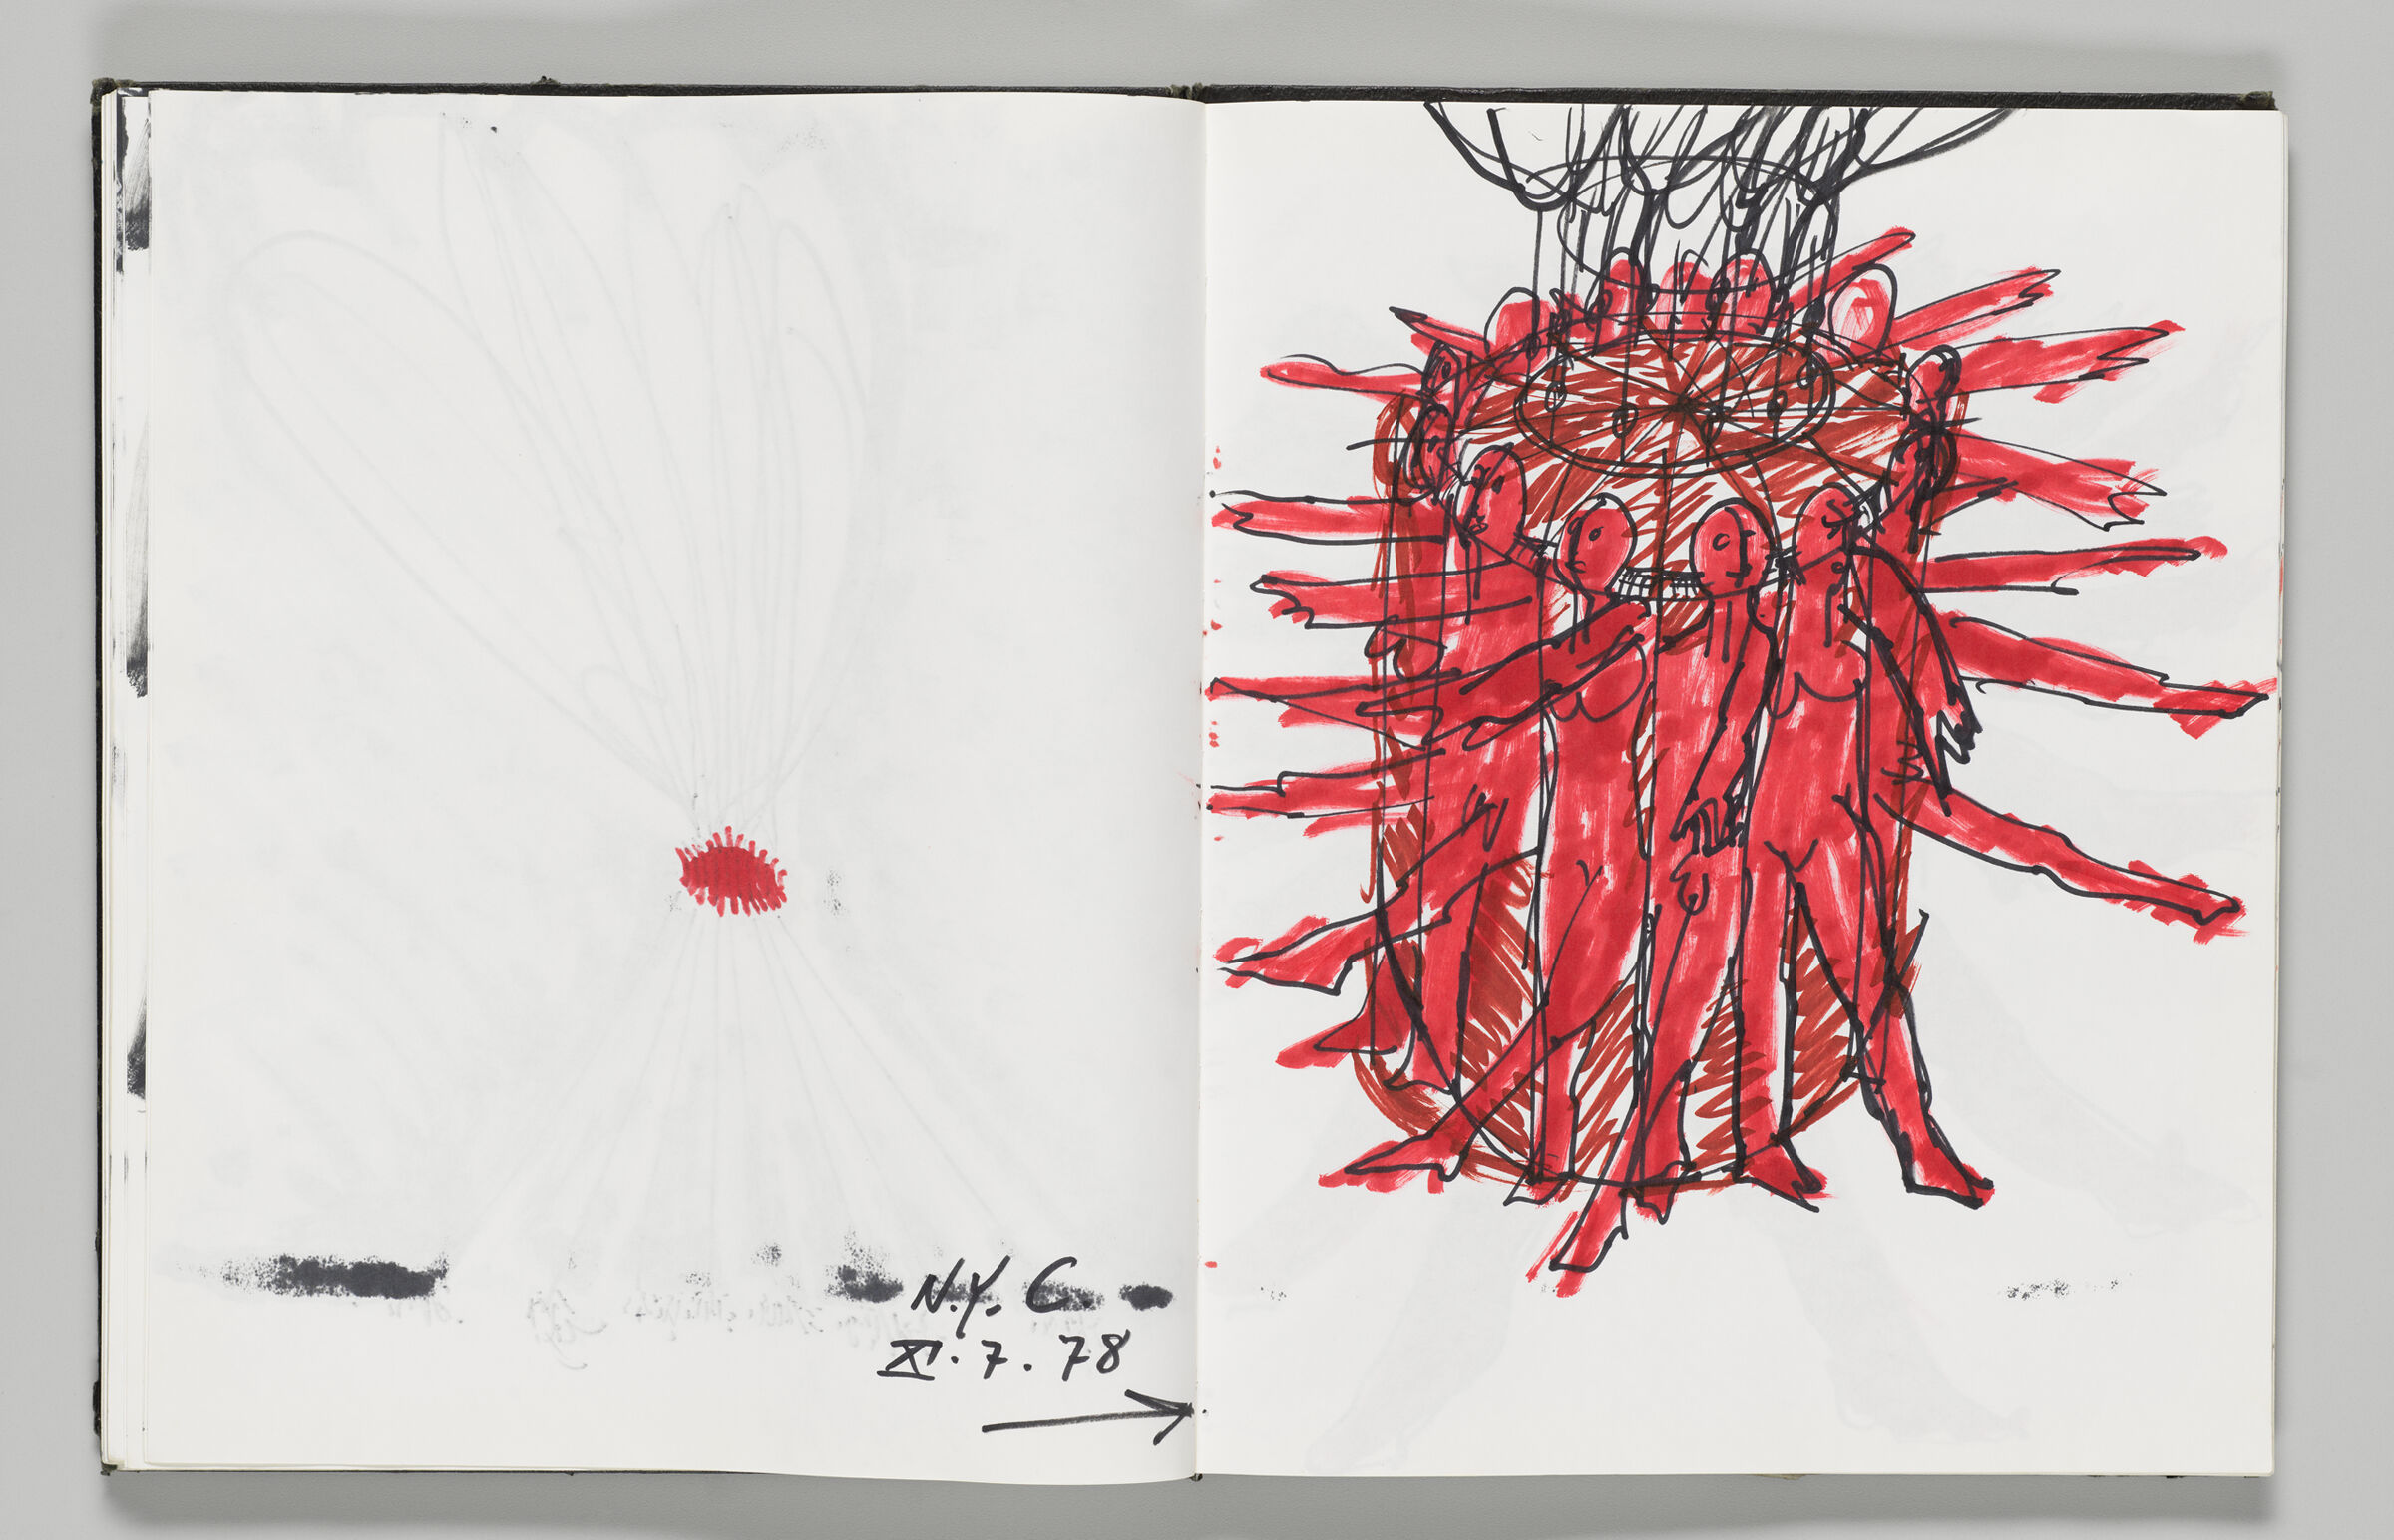 Untitled (Note With Bleed-Through And Color Transfer Of Previous Pages, Left Page); Untitled (Carousel Of Male And Female Figures, Right Page)